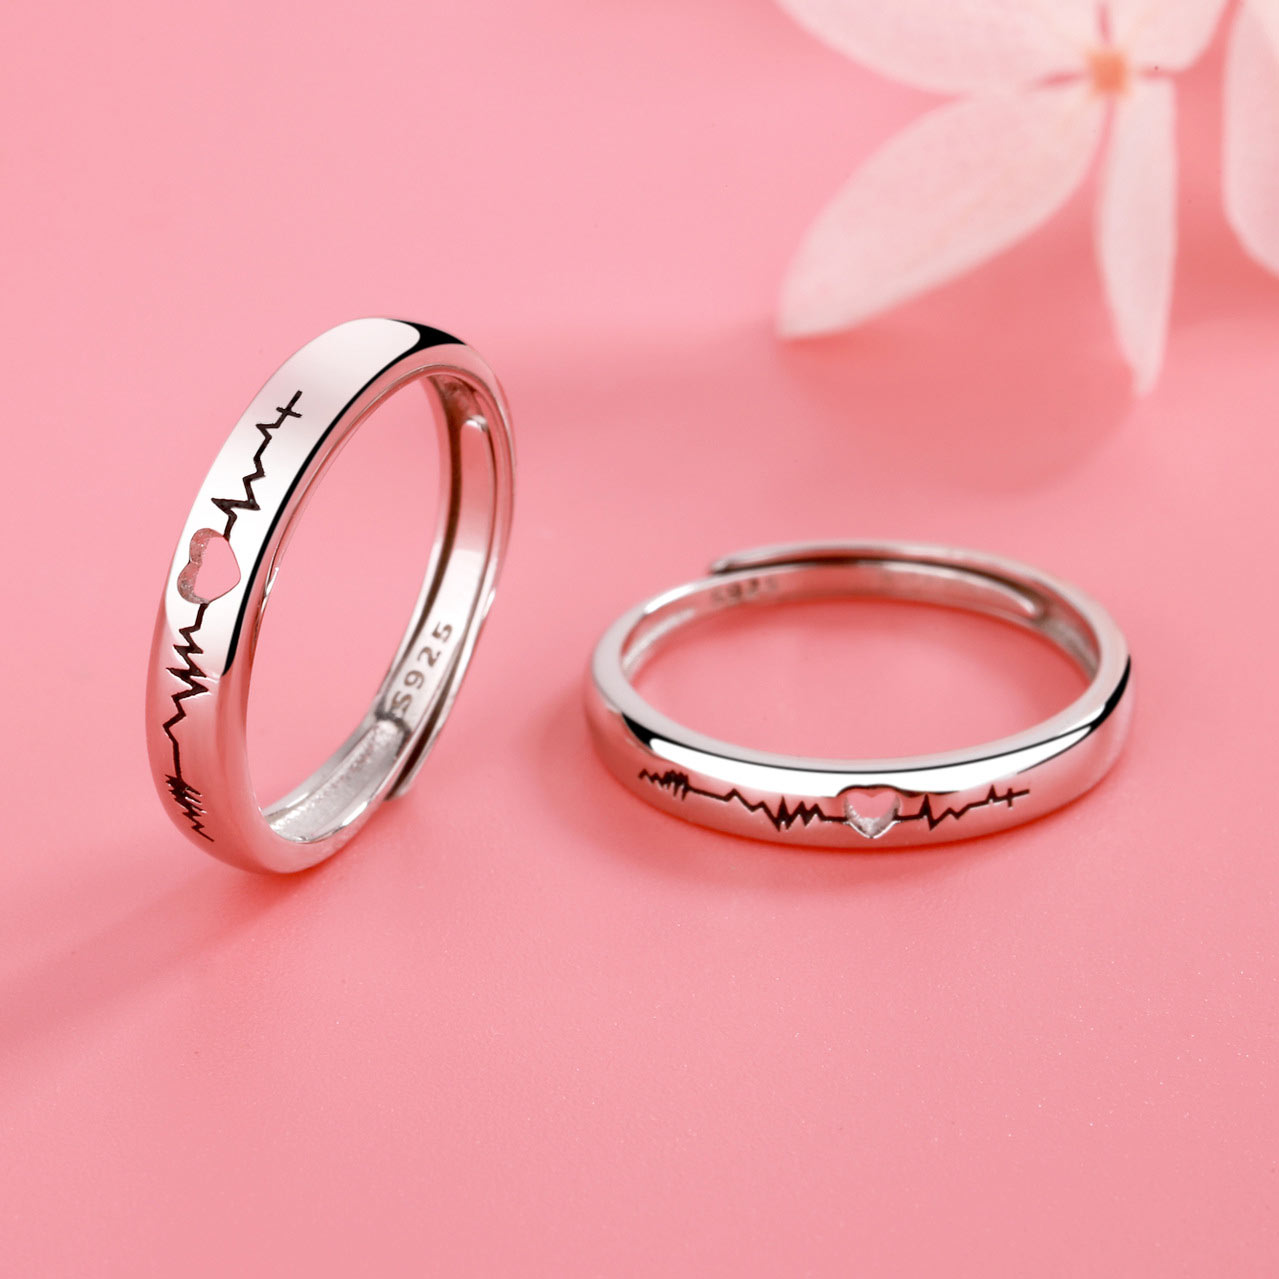 Engraved Heartbeat Couple Promise Rings Set